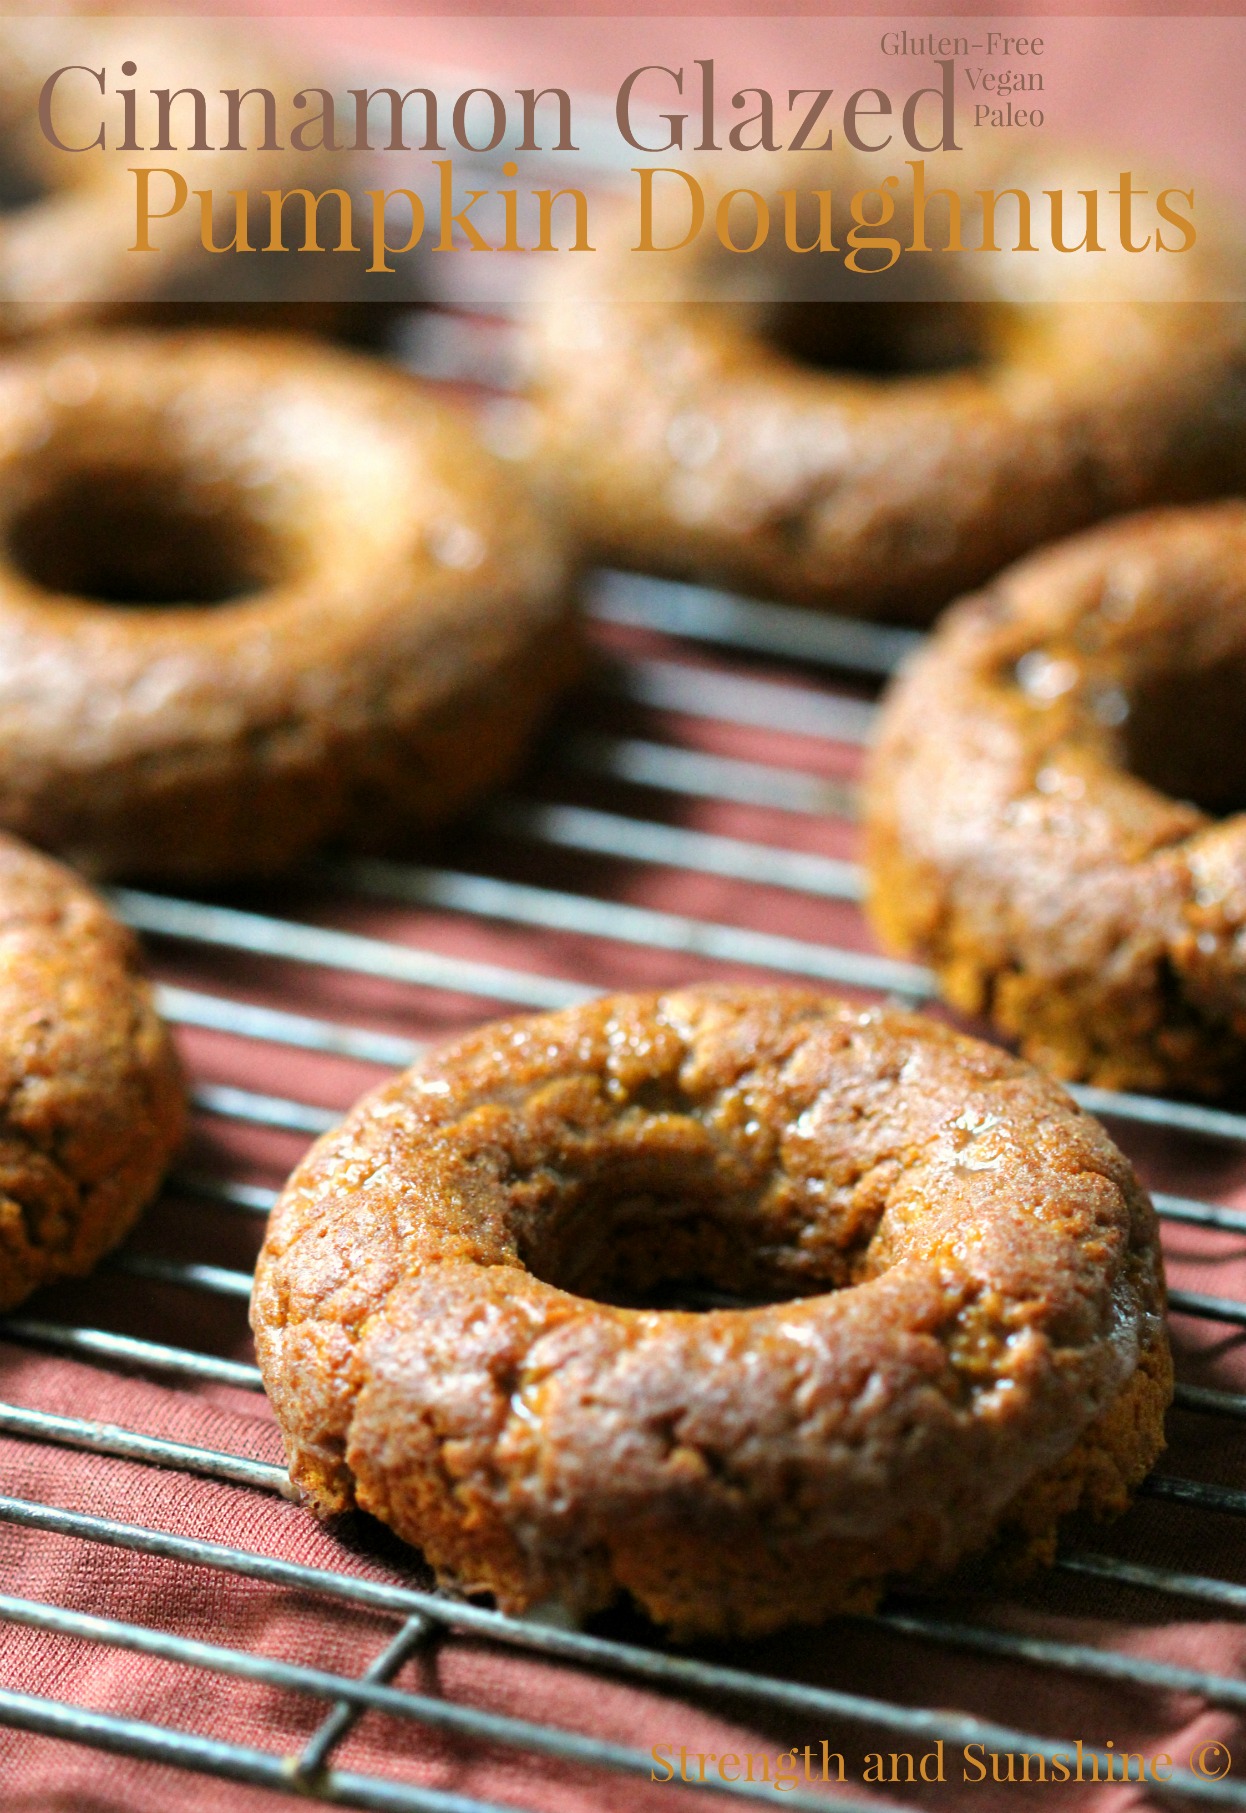 Cinnamon Glazed Pumpkin Doughnuts | Strength and Sunshine @RebeccaGF666 Your morning coffee companion just got sweeter. Cinnamon Glazed Pumpkin Doughnuts, baked to perfection and loaded with pumpkin. Gluten-free, vegan, and paleo, the flavors of fall will keep everyone warm and cozy!